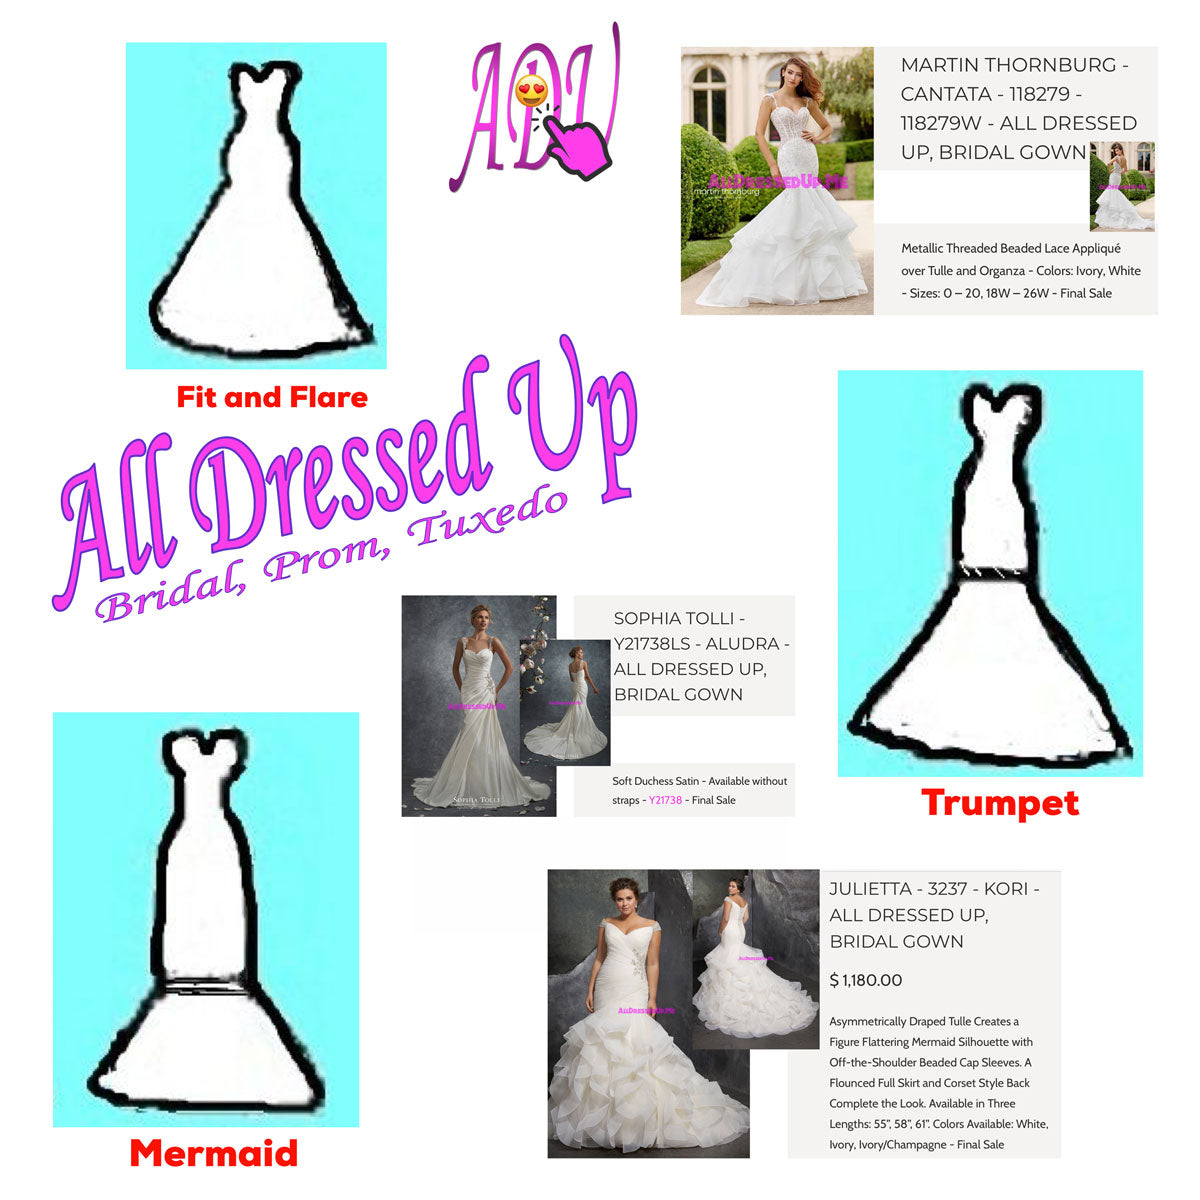 Mermaid, Trumpet, and Fit & Flare – What's the Difference? – Run For The  Dress